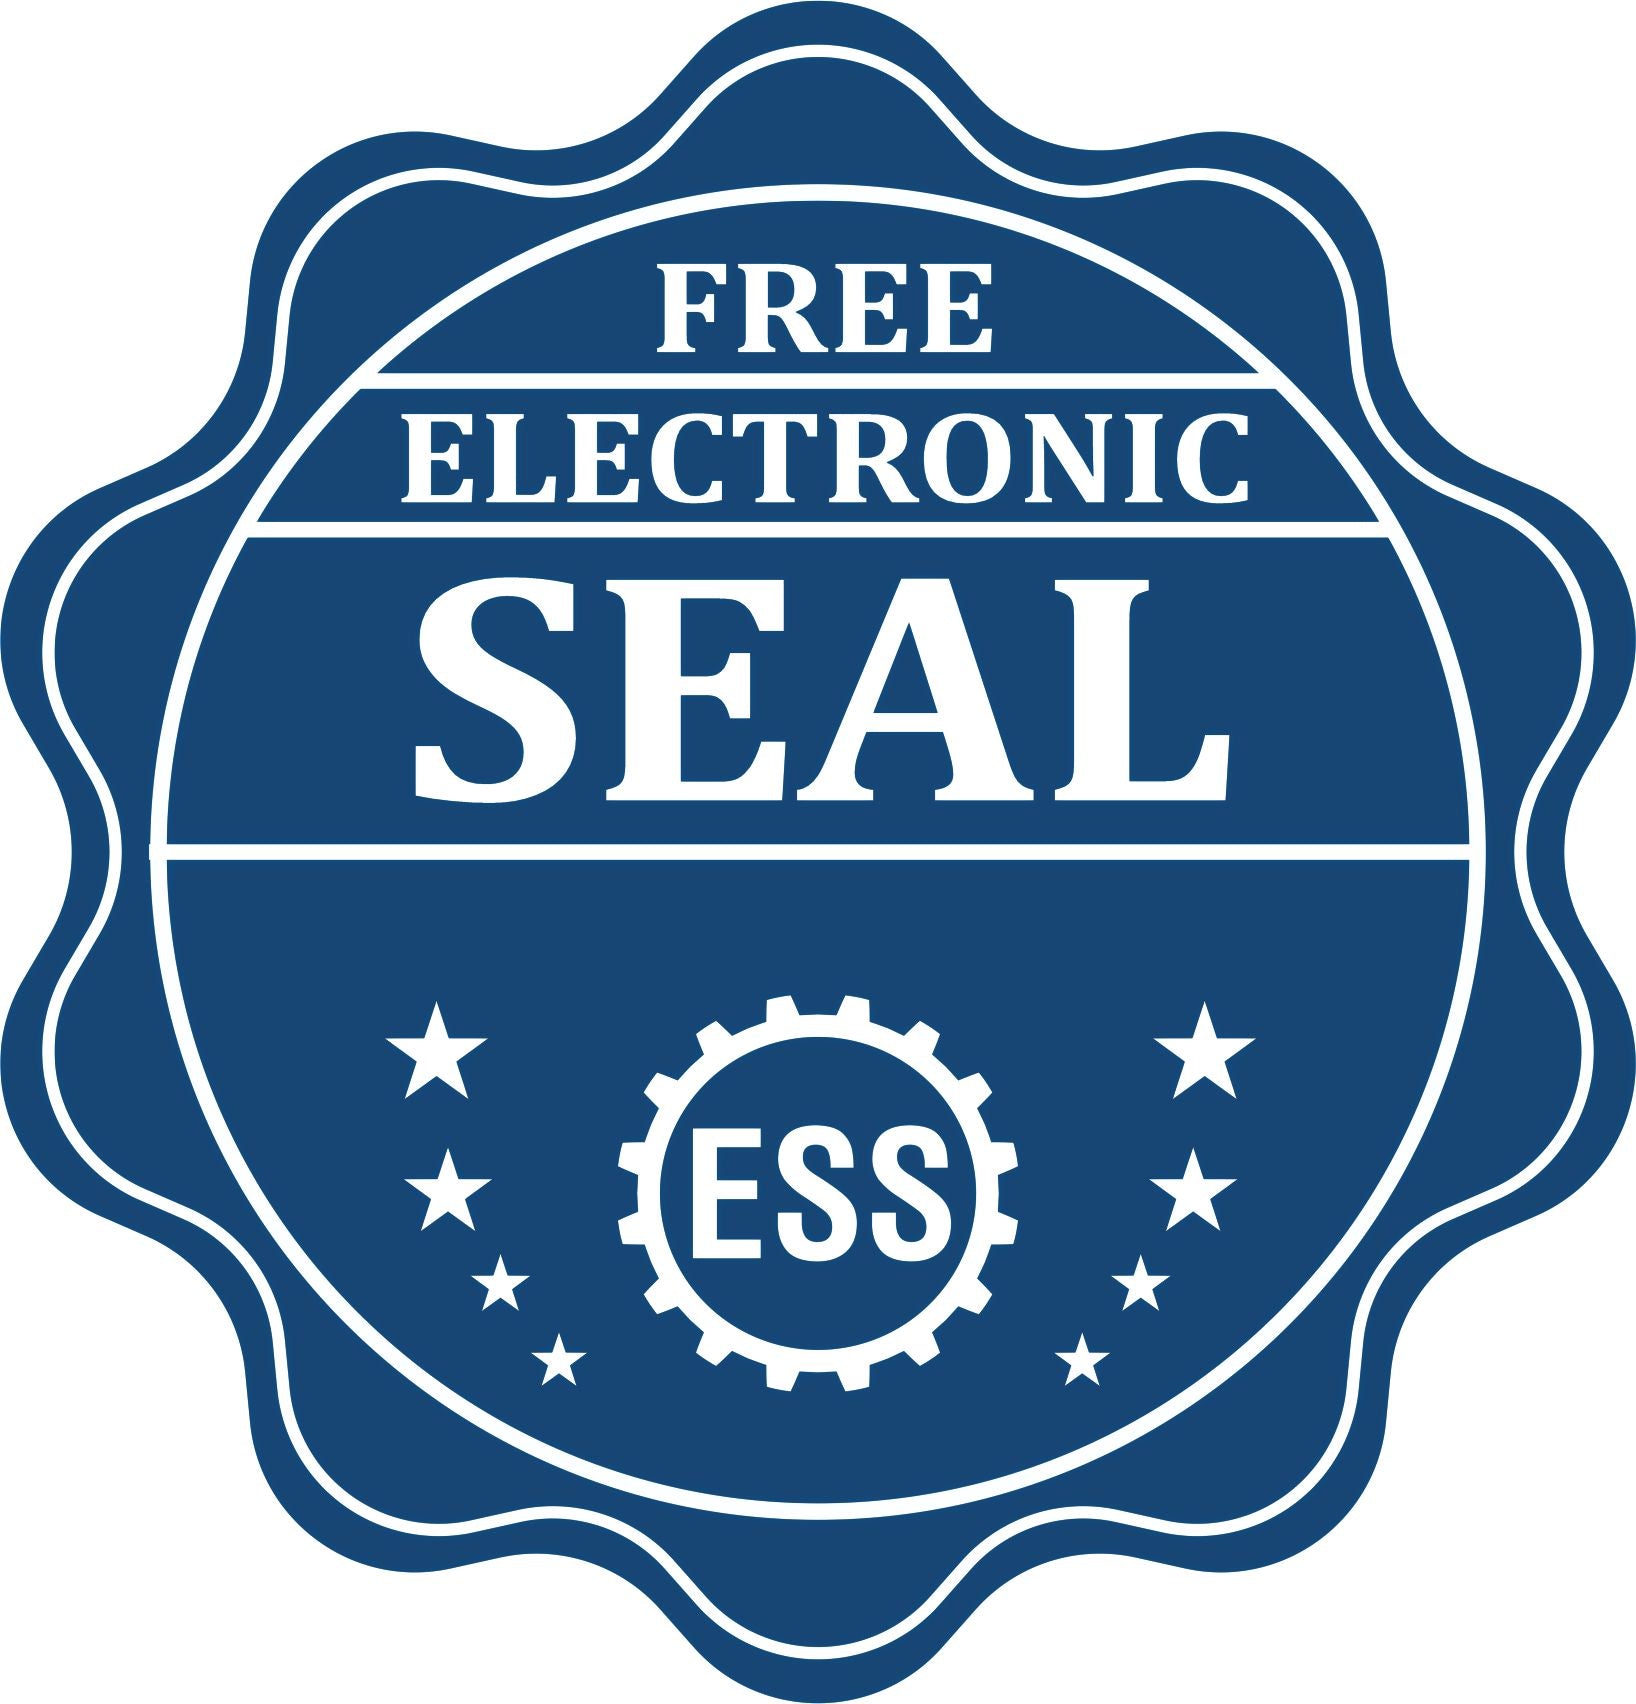 A badge showing a free electronic seal for the Heavy Duty Cast Iron New York Land Surveyor Seal Embosser with stars and the ESS gear on the emblem.